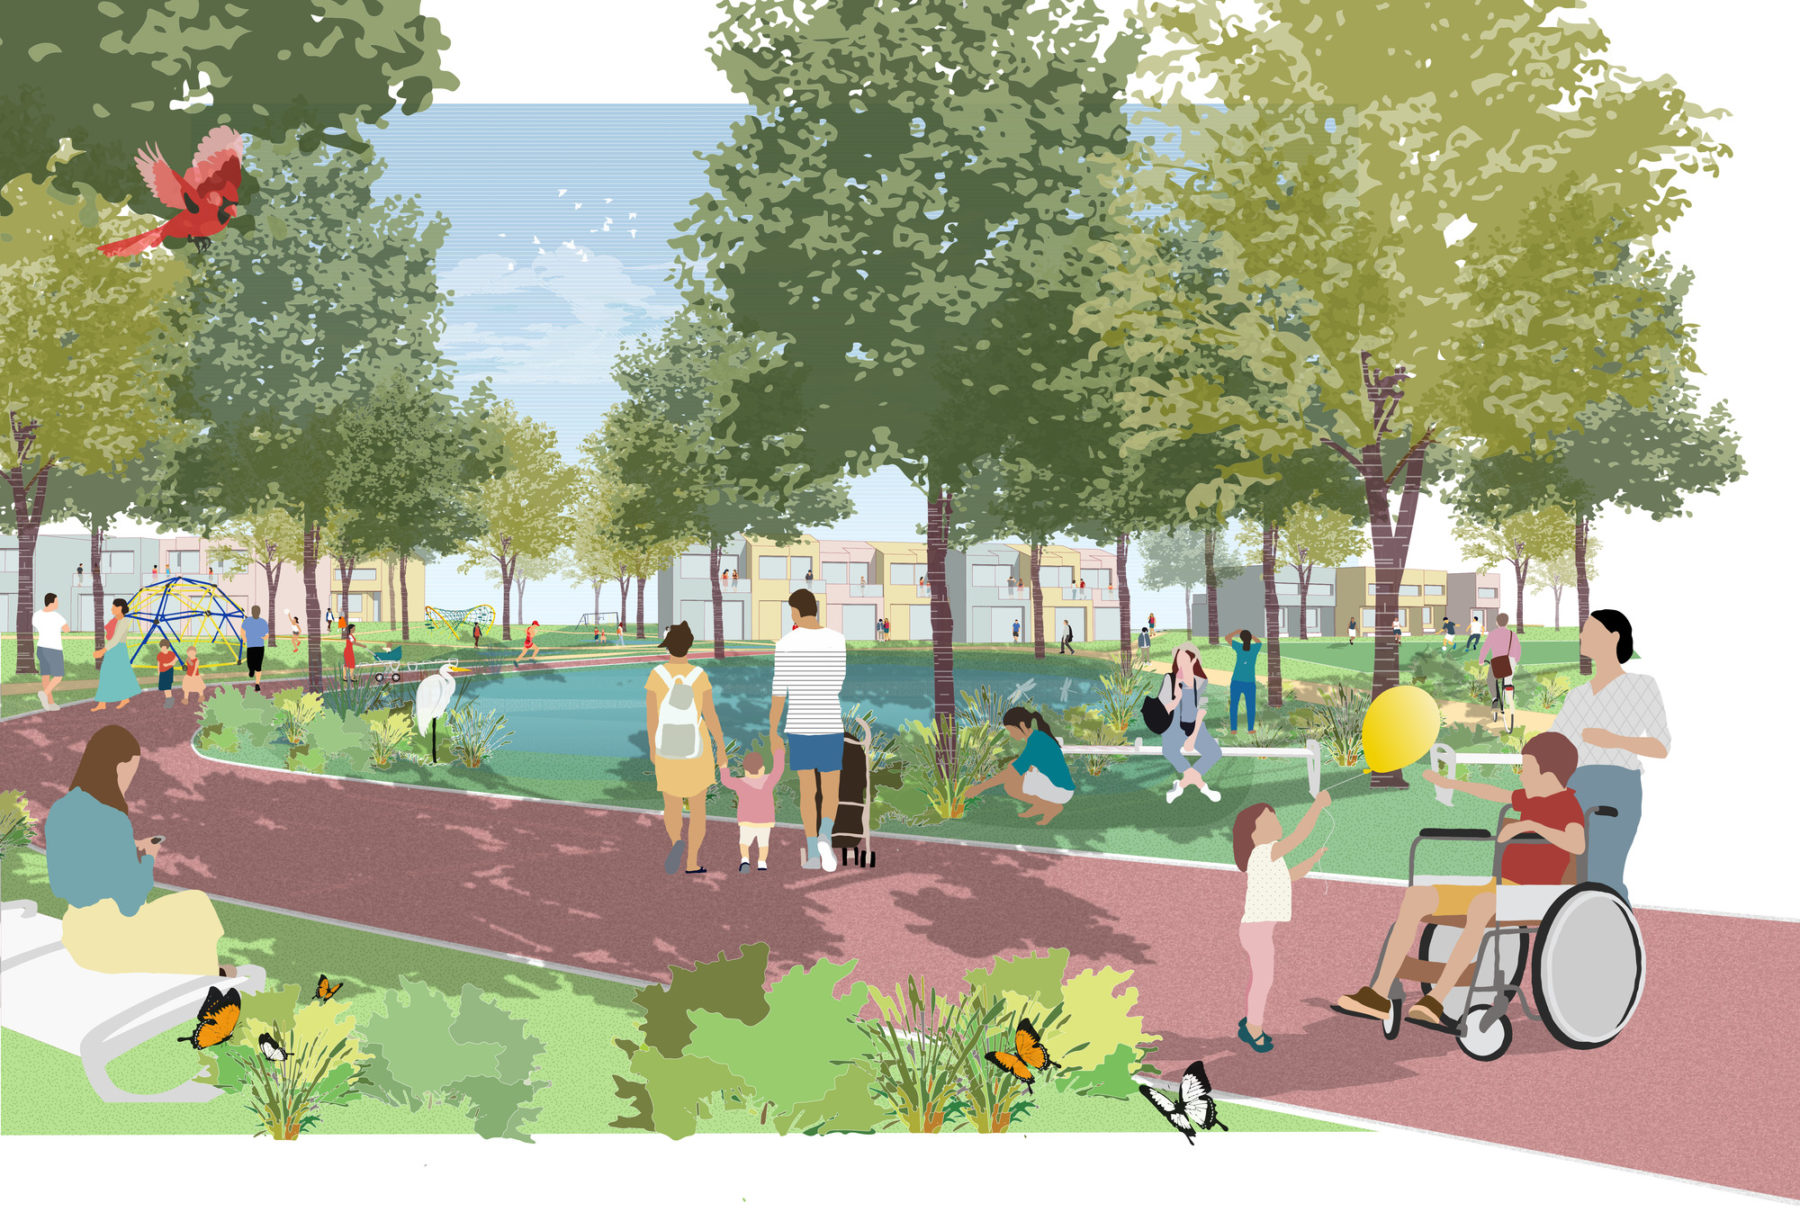 rendering of a park with kids playing